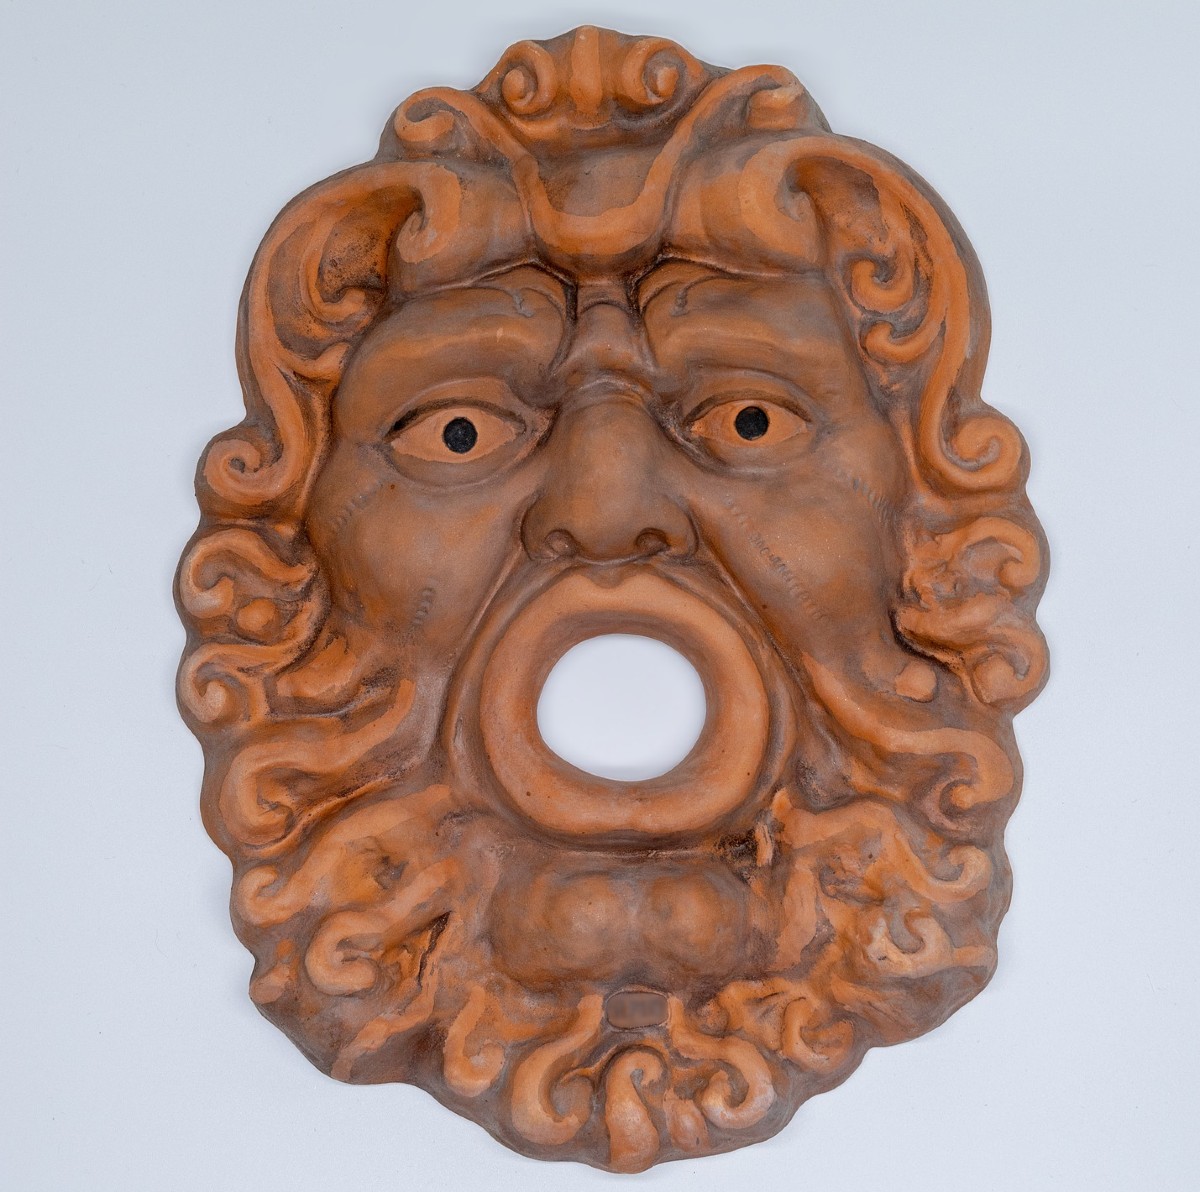 Ancient theater mask